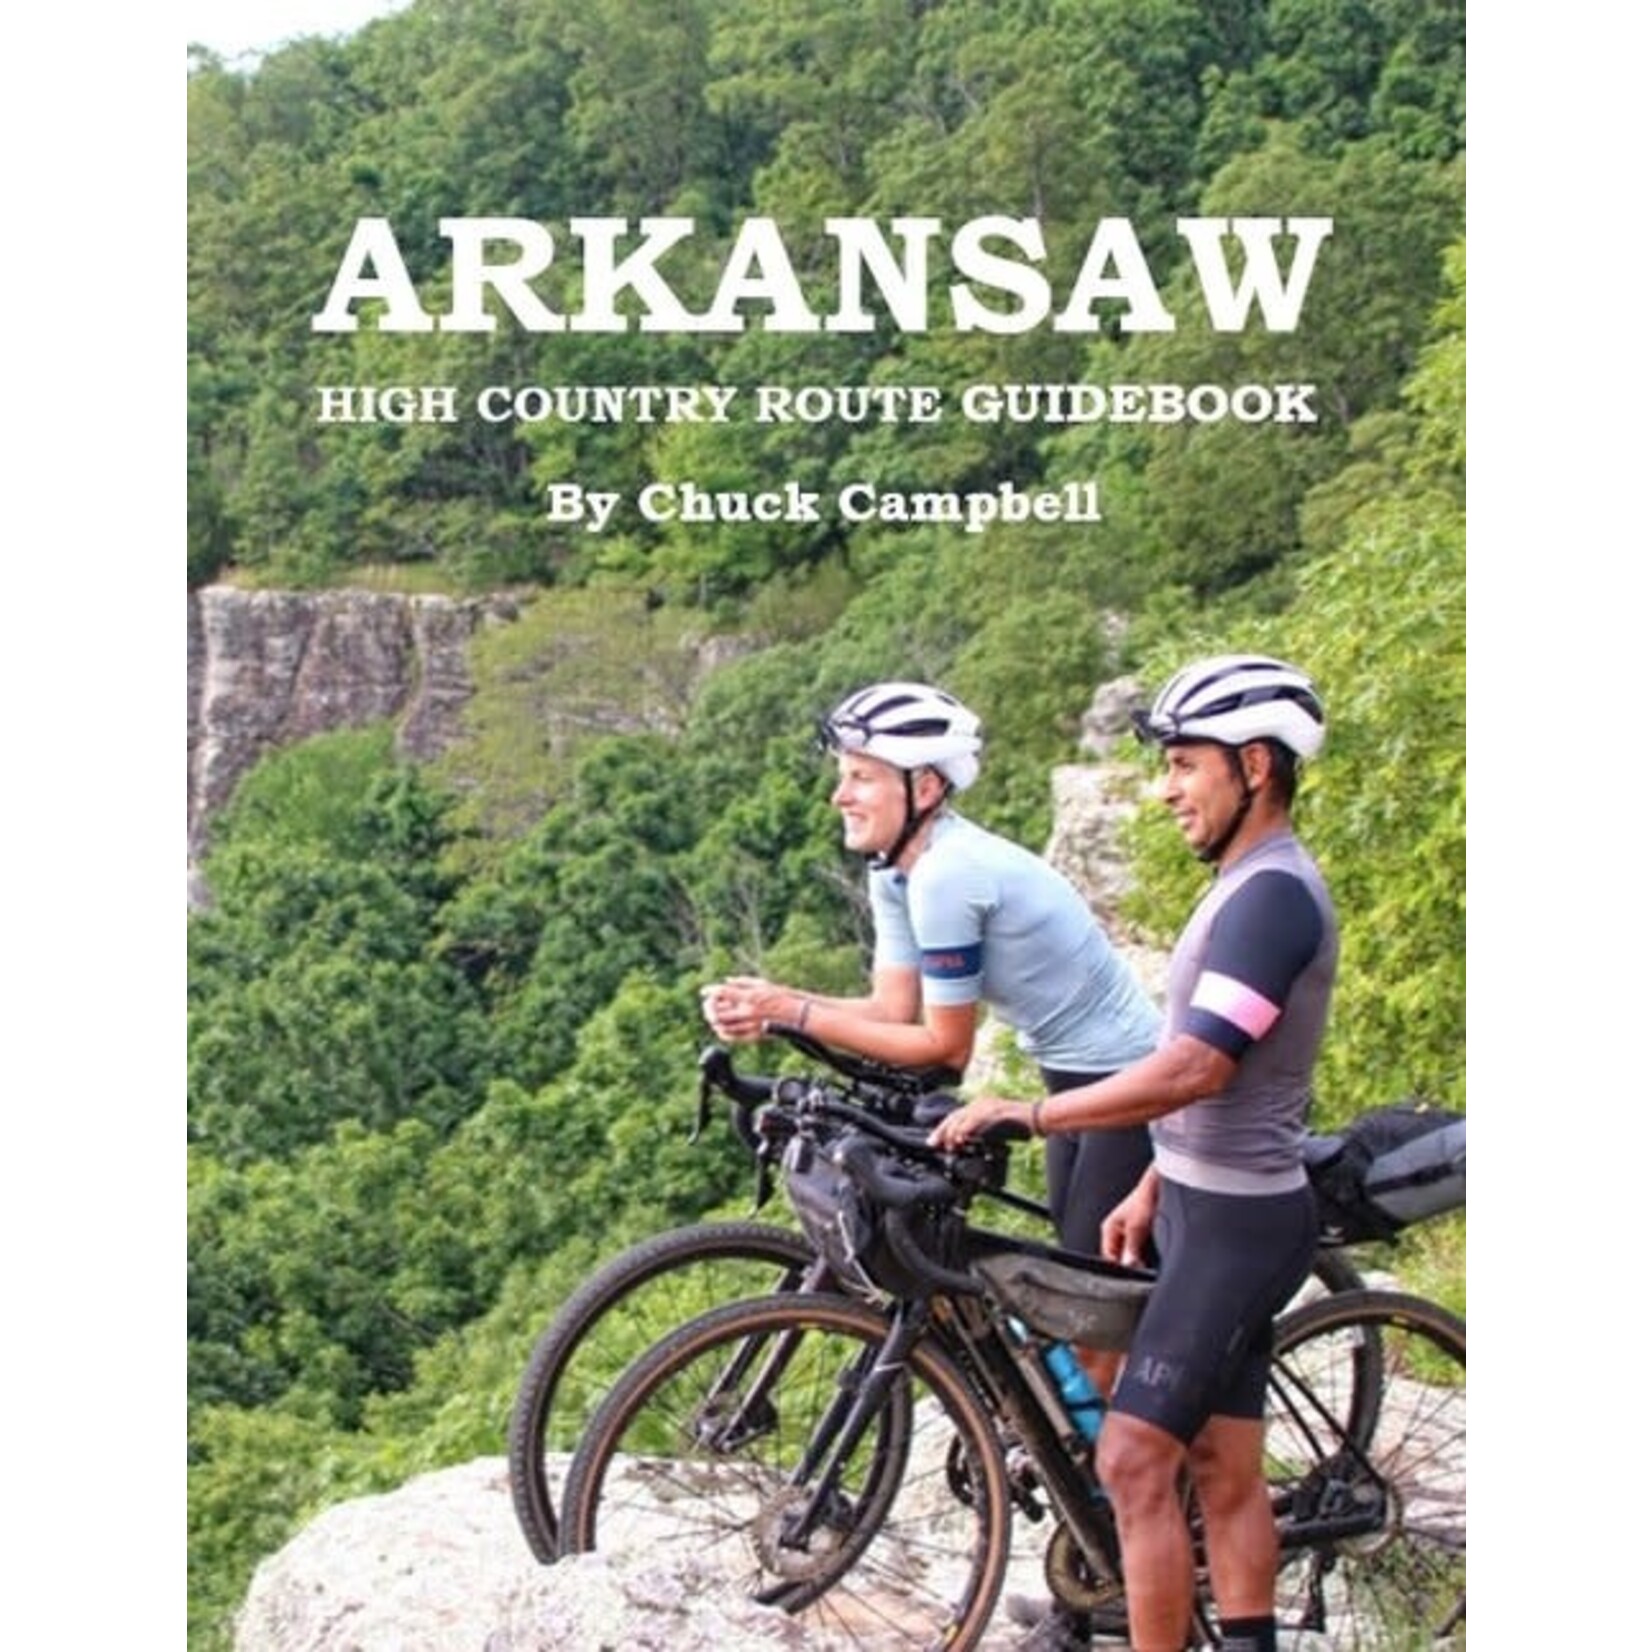 Arkansaw high Country Route Guidebook